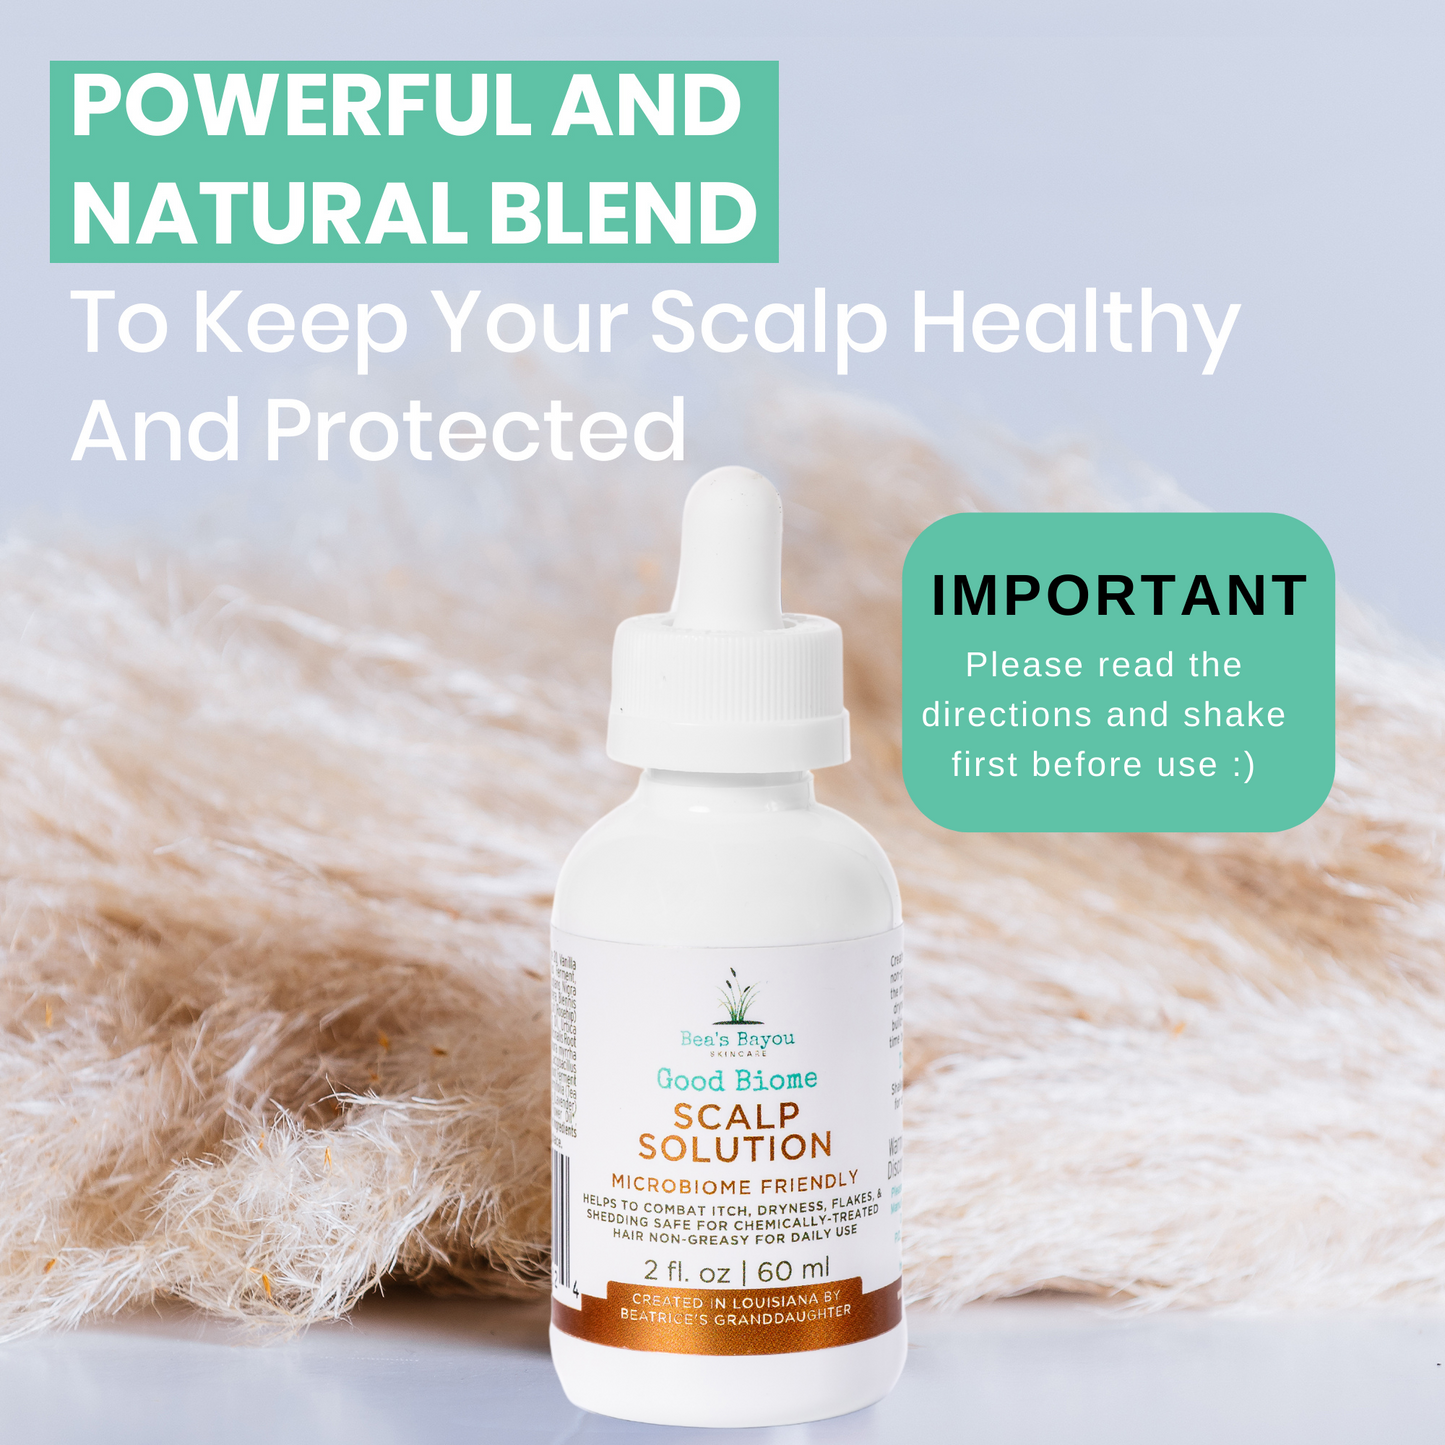 Good Biome Scalp Solution Double Bundle | Leave-in Scalp Relief | Microbiome-friendly